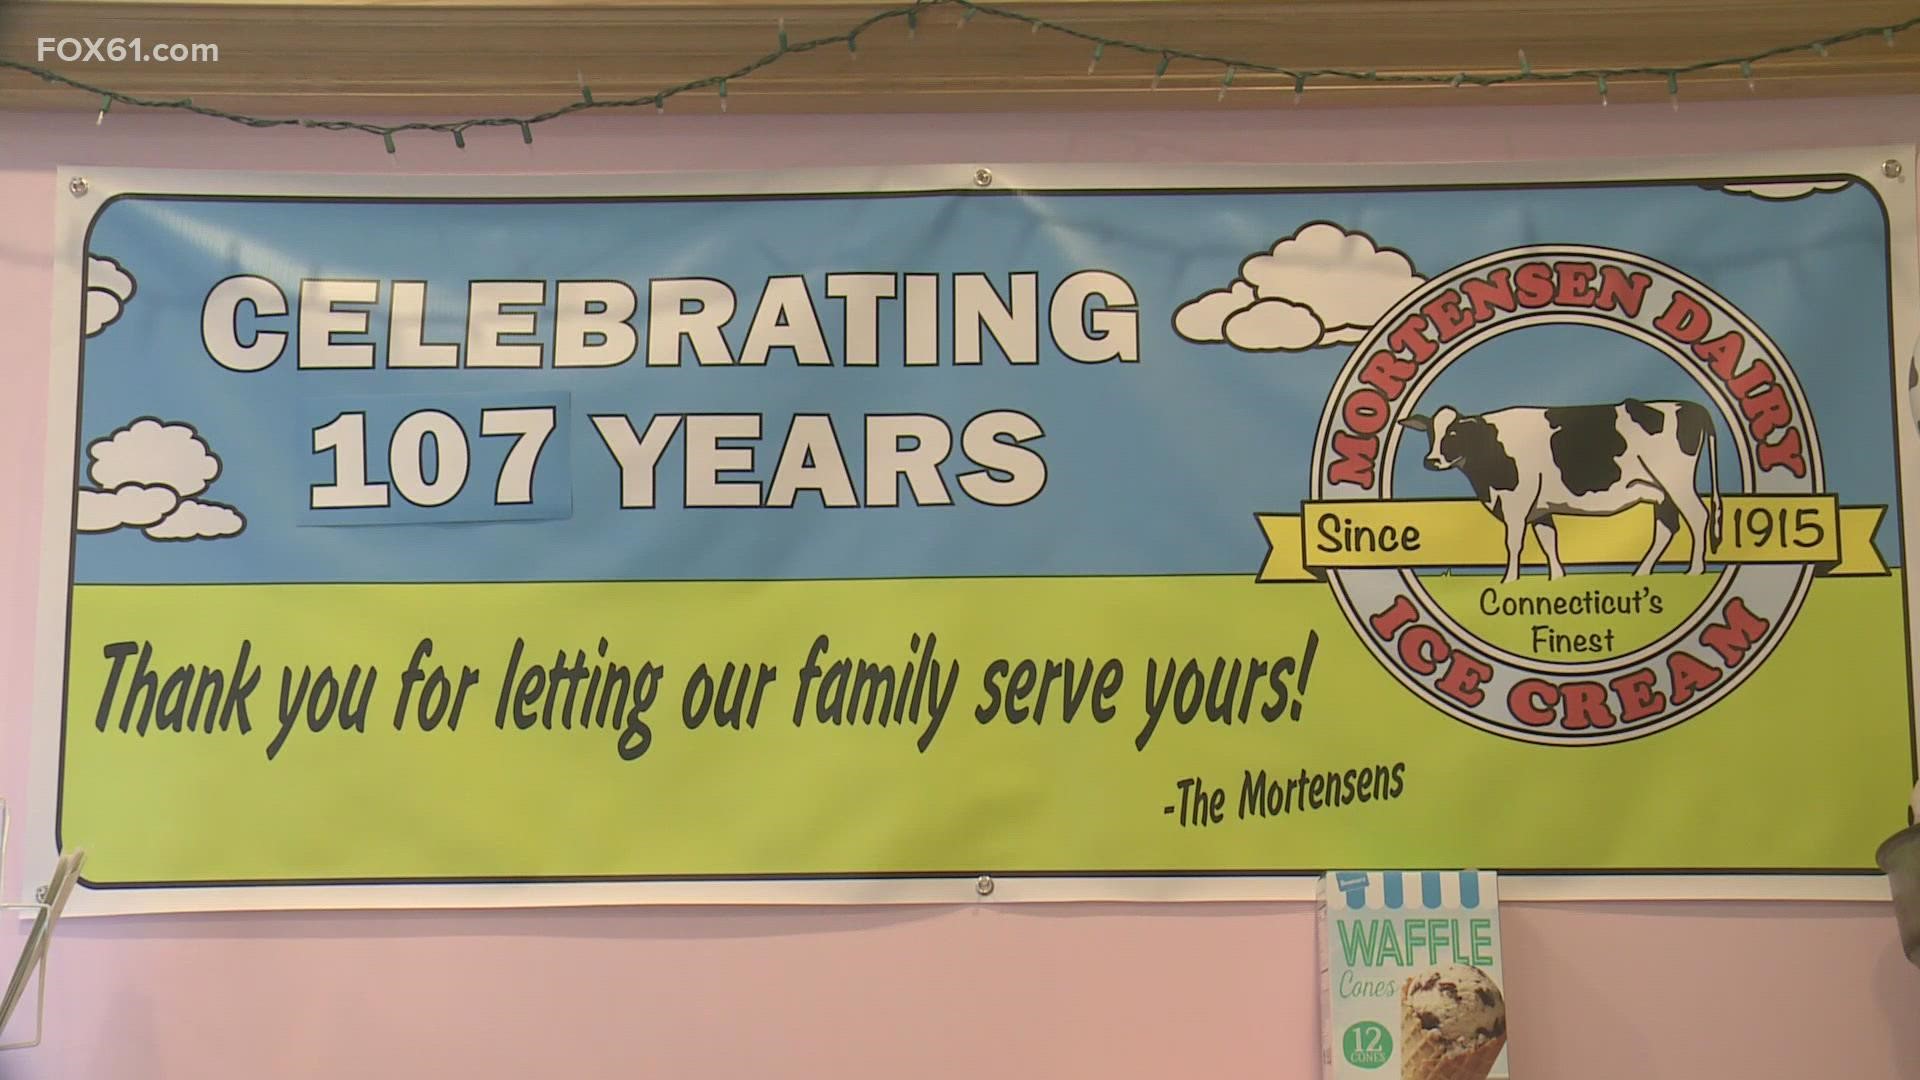 The family business in Newington, Conn. offered $1.07 soft serve cones to celebrate its anniversary.